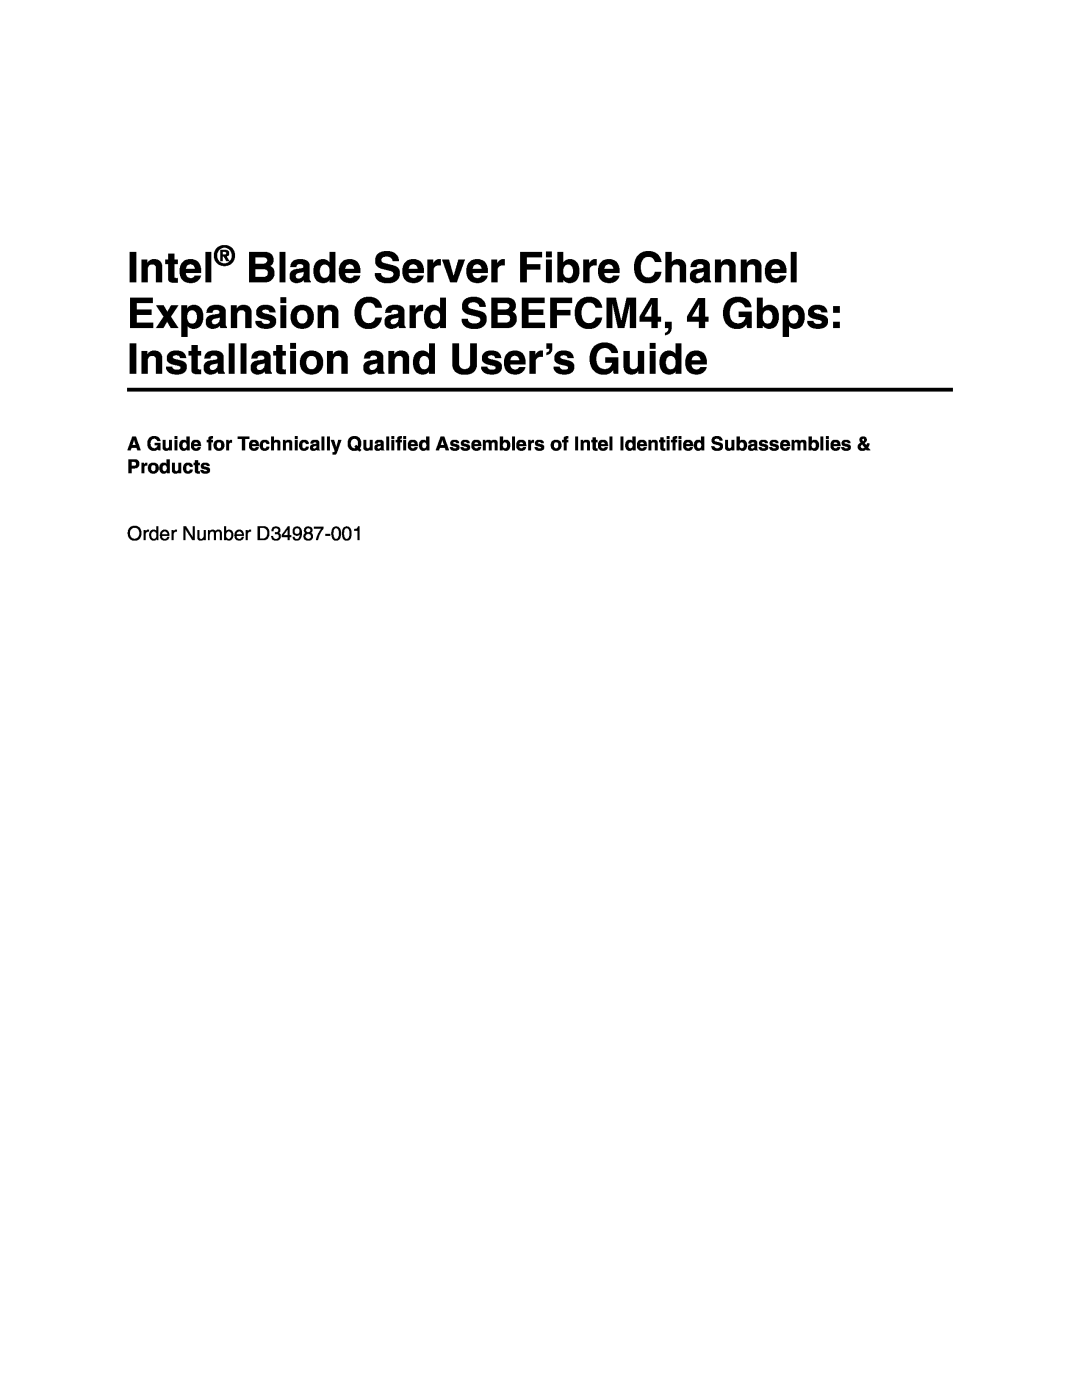 Intel SEBFCM4 manual Intel Blade Server Fibre Channel Expansion Card SBEFCM4, 4 Gbps, Installation and User’s Guide 